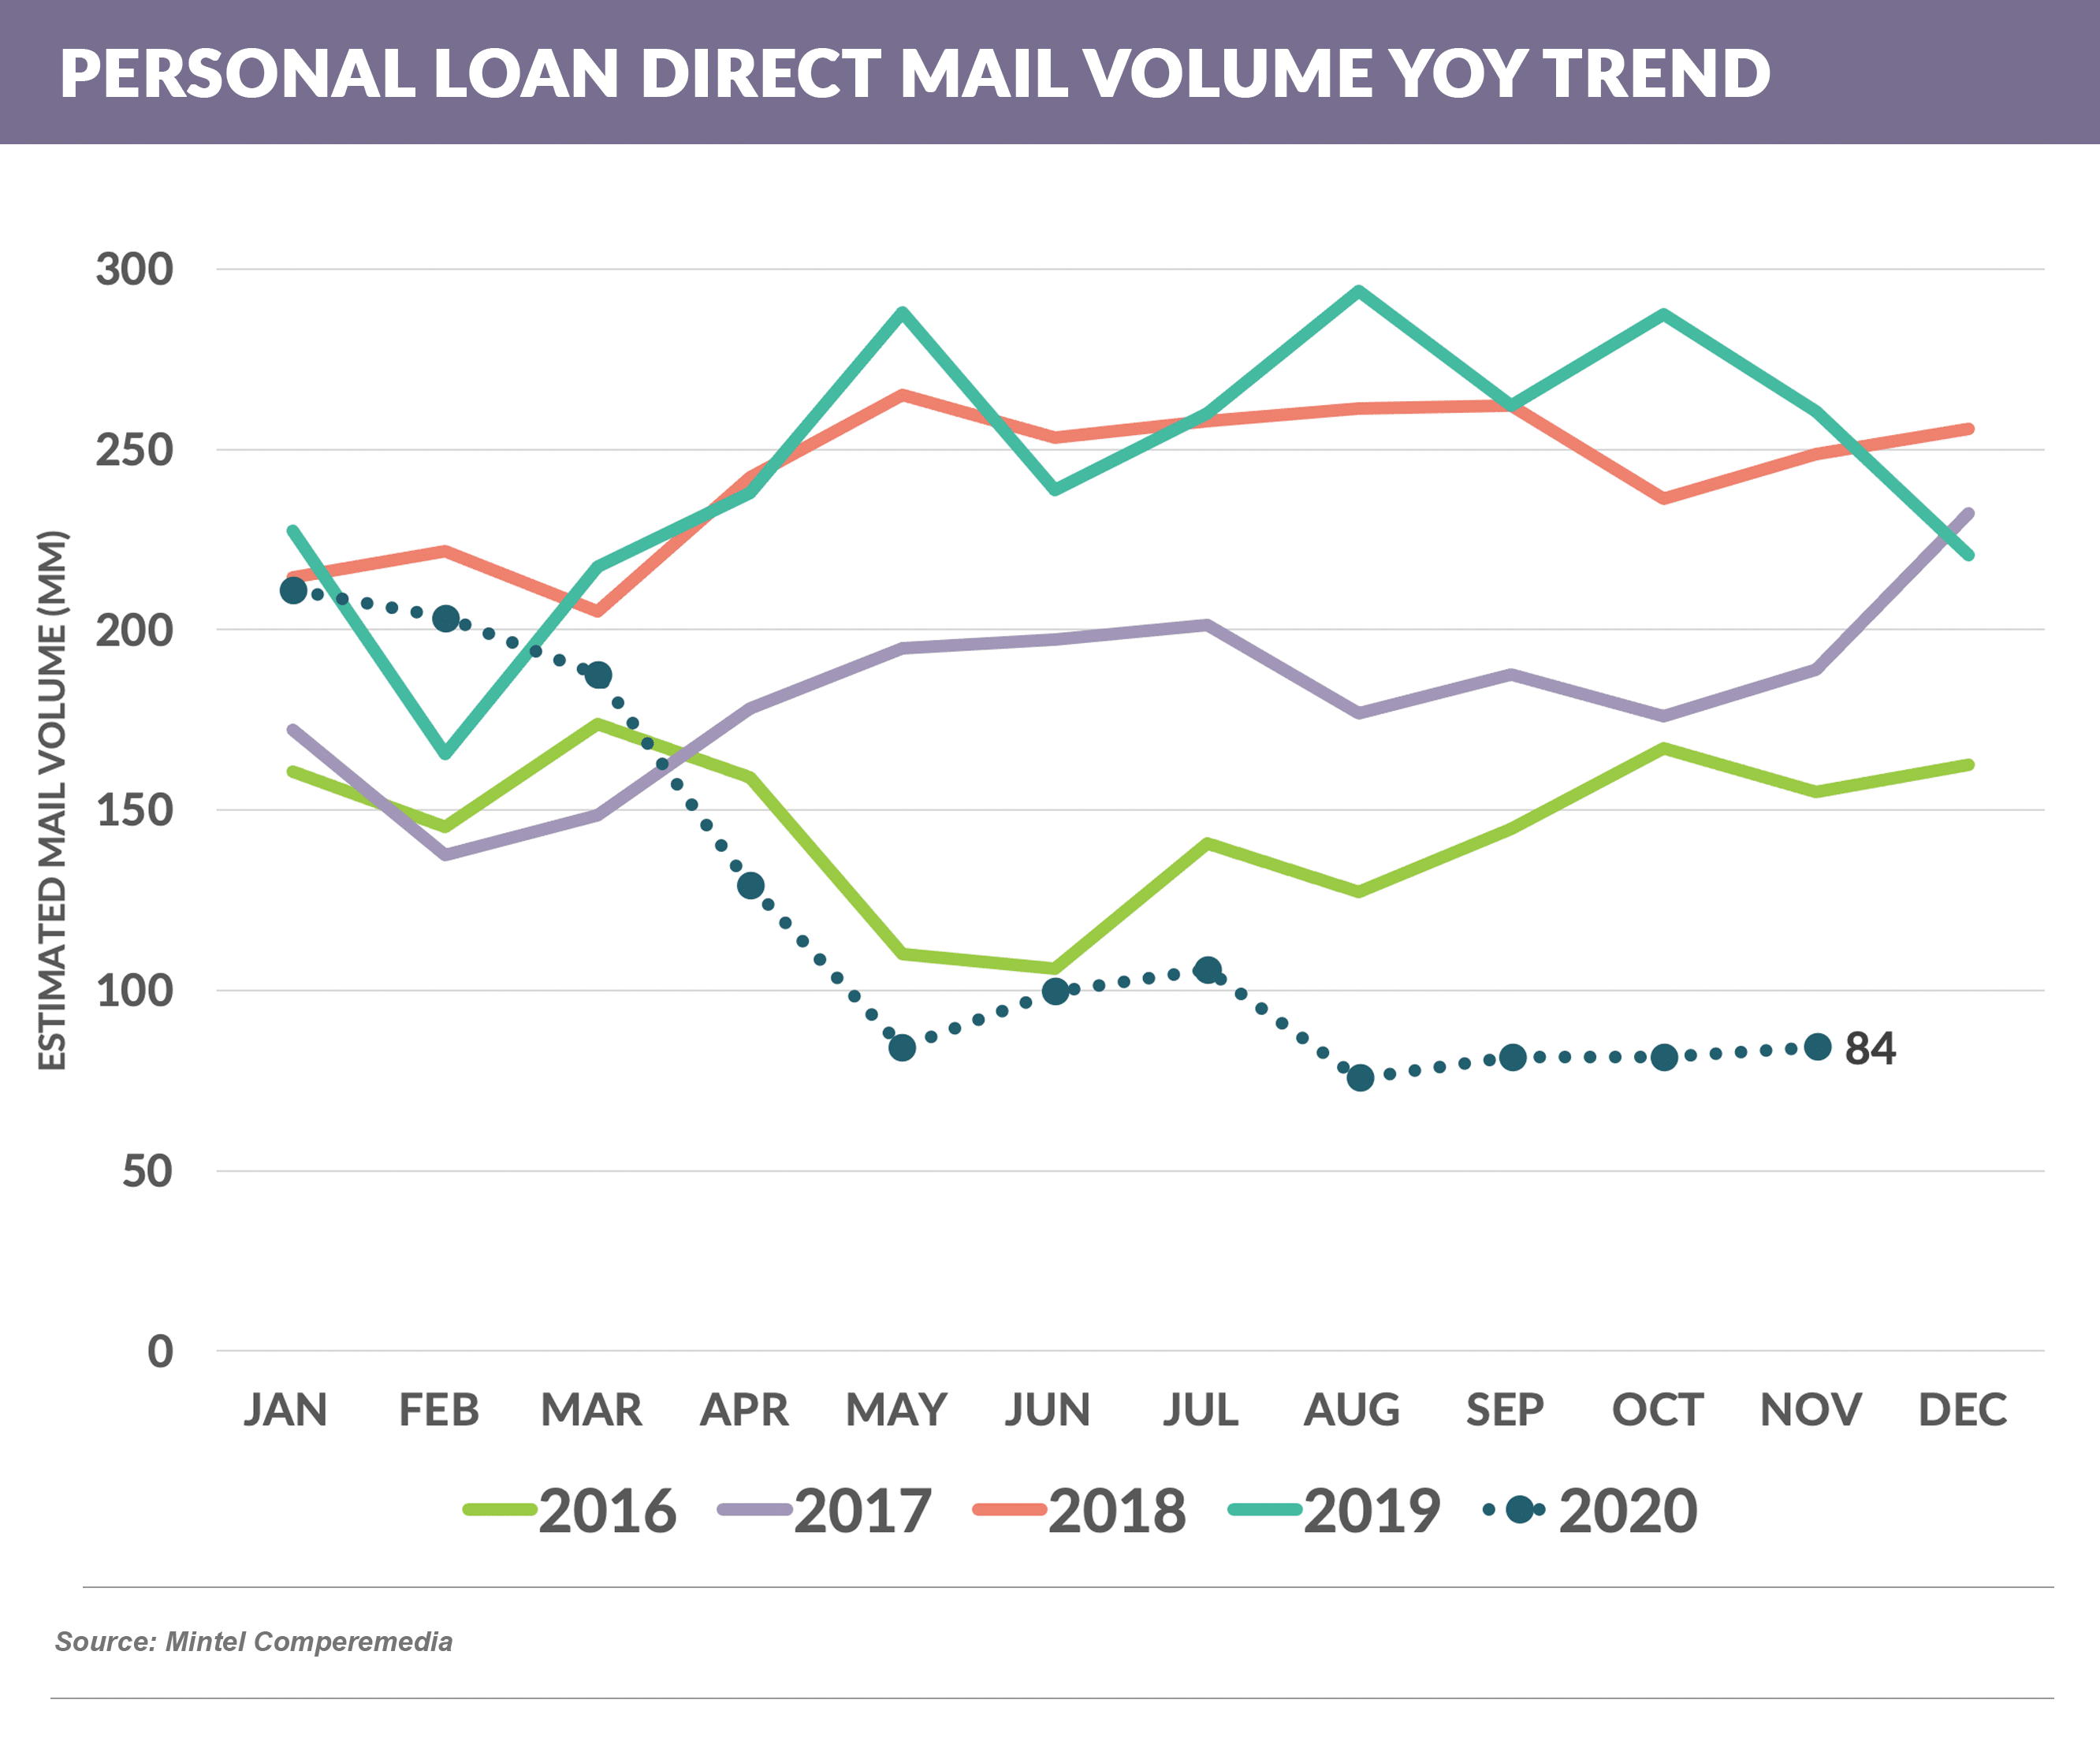 PERSONAL LOAN DIRECT MAIL VOLUME YOY 20210109